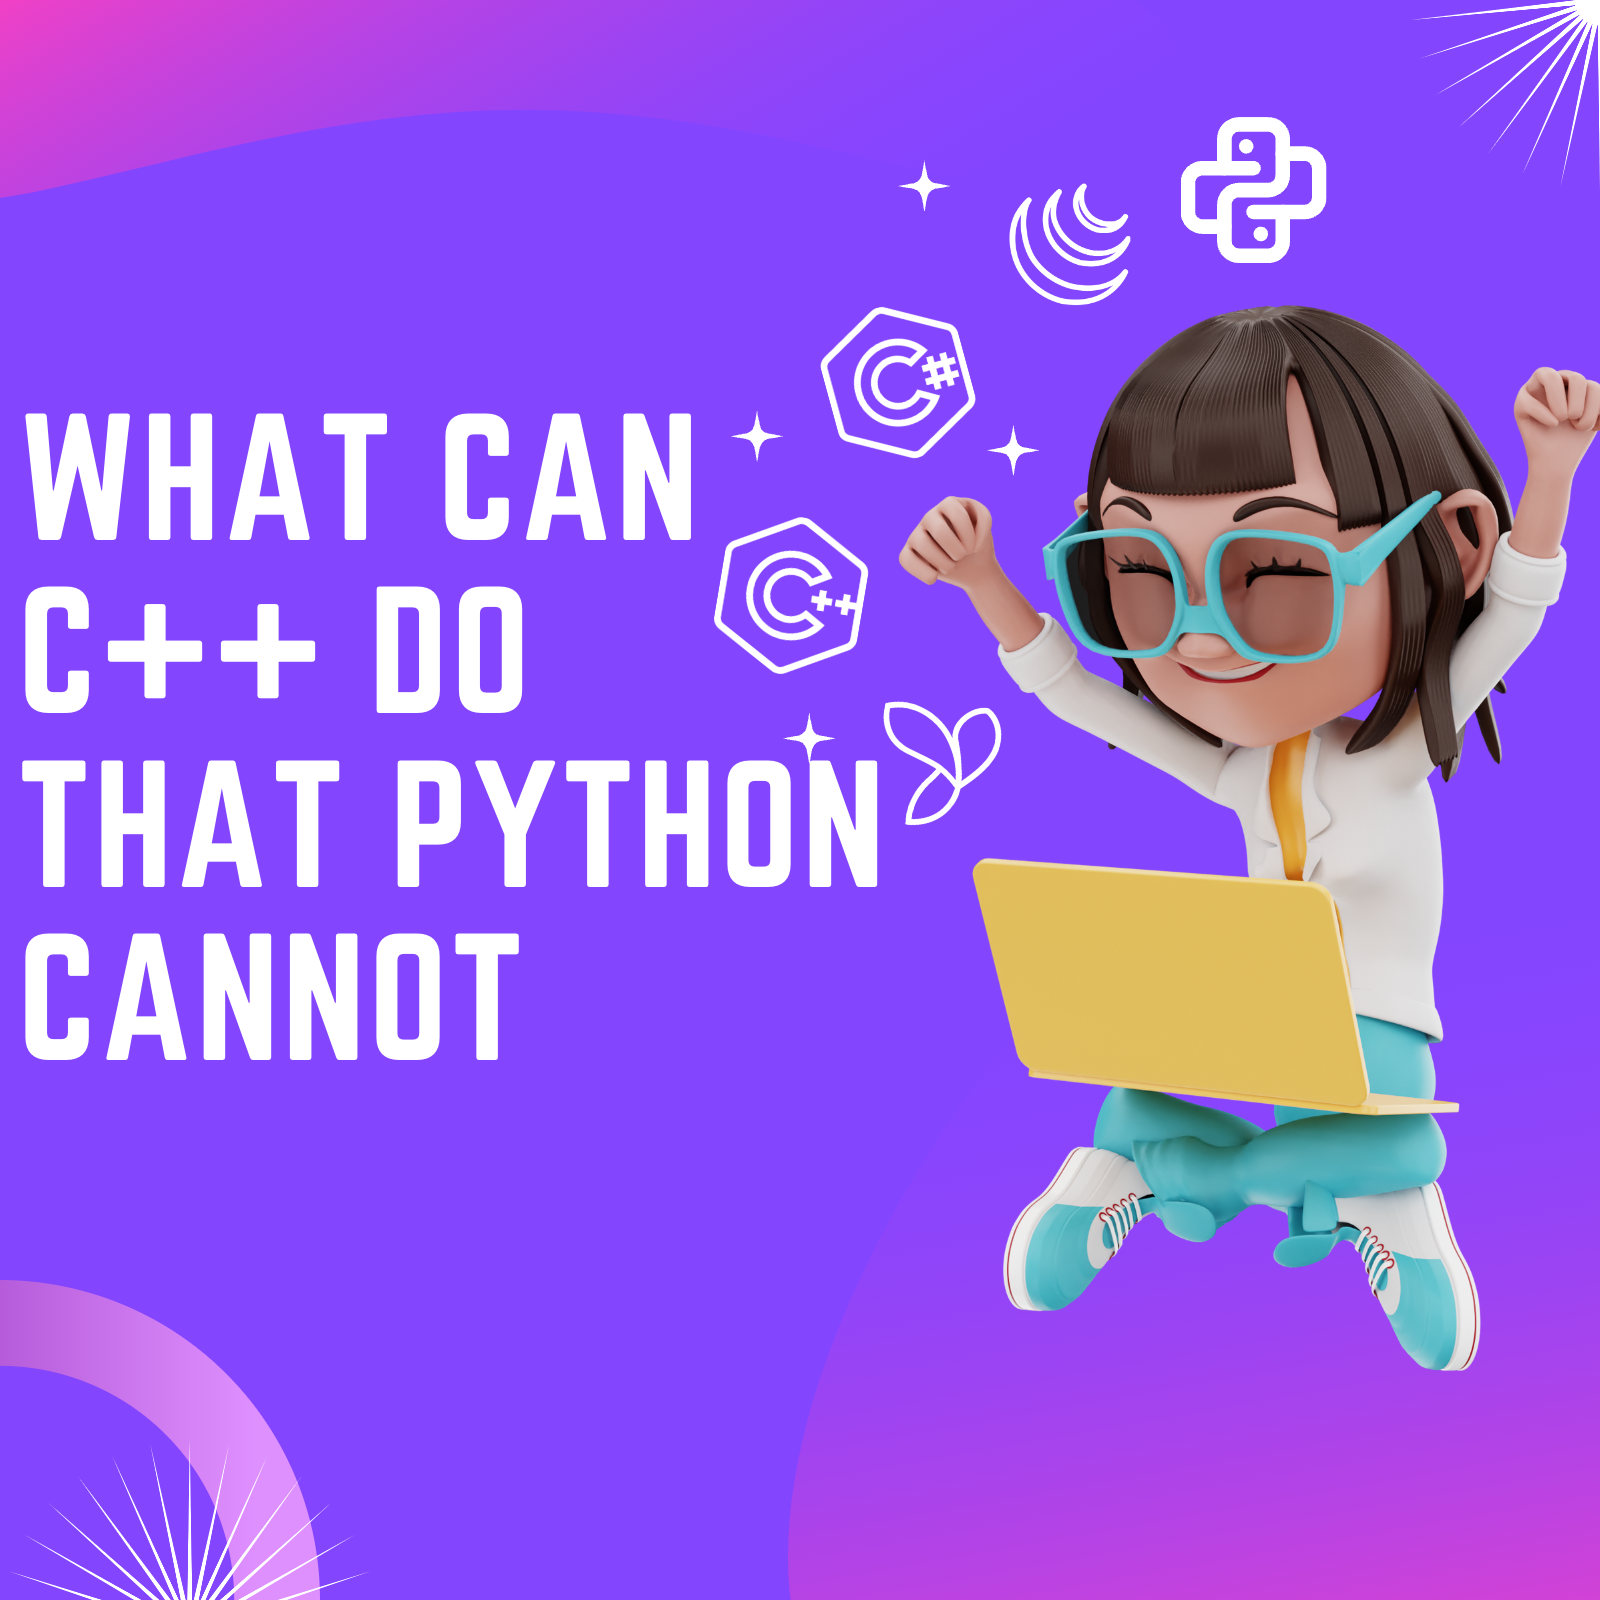 What can Python do that C Cannot?